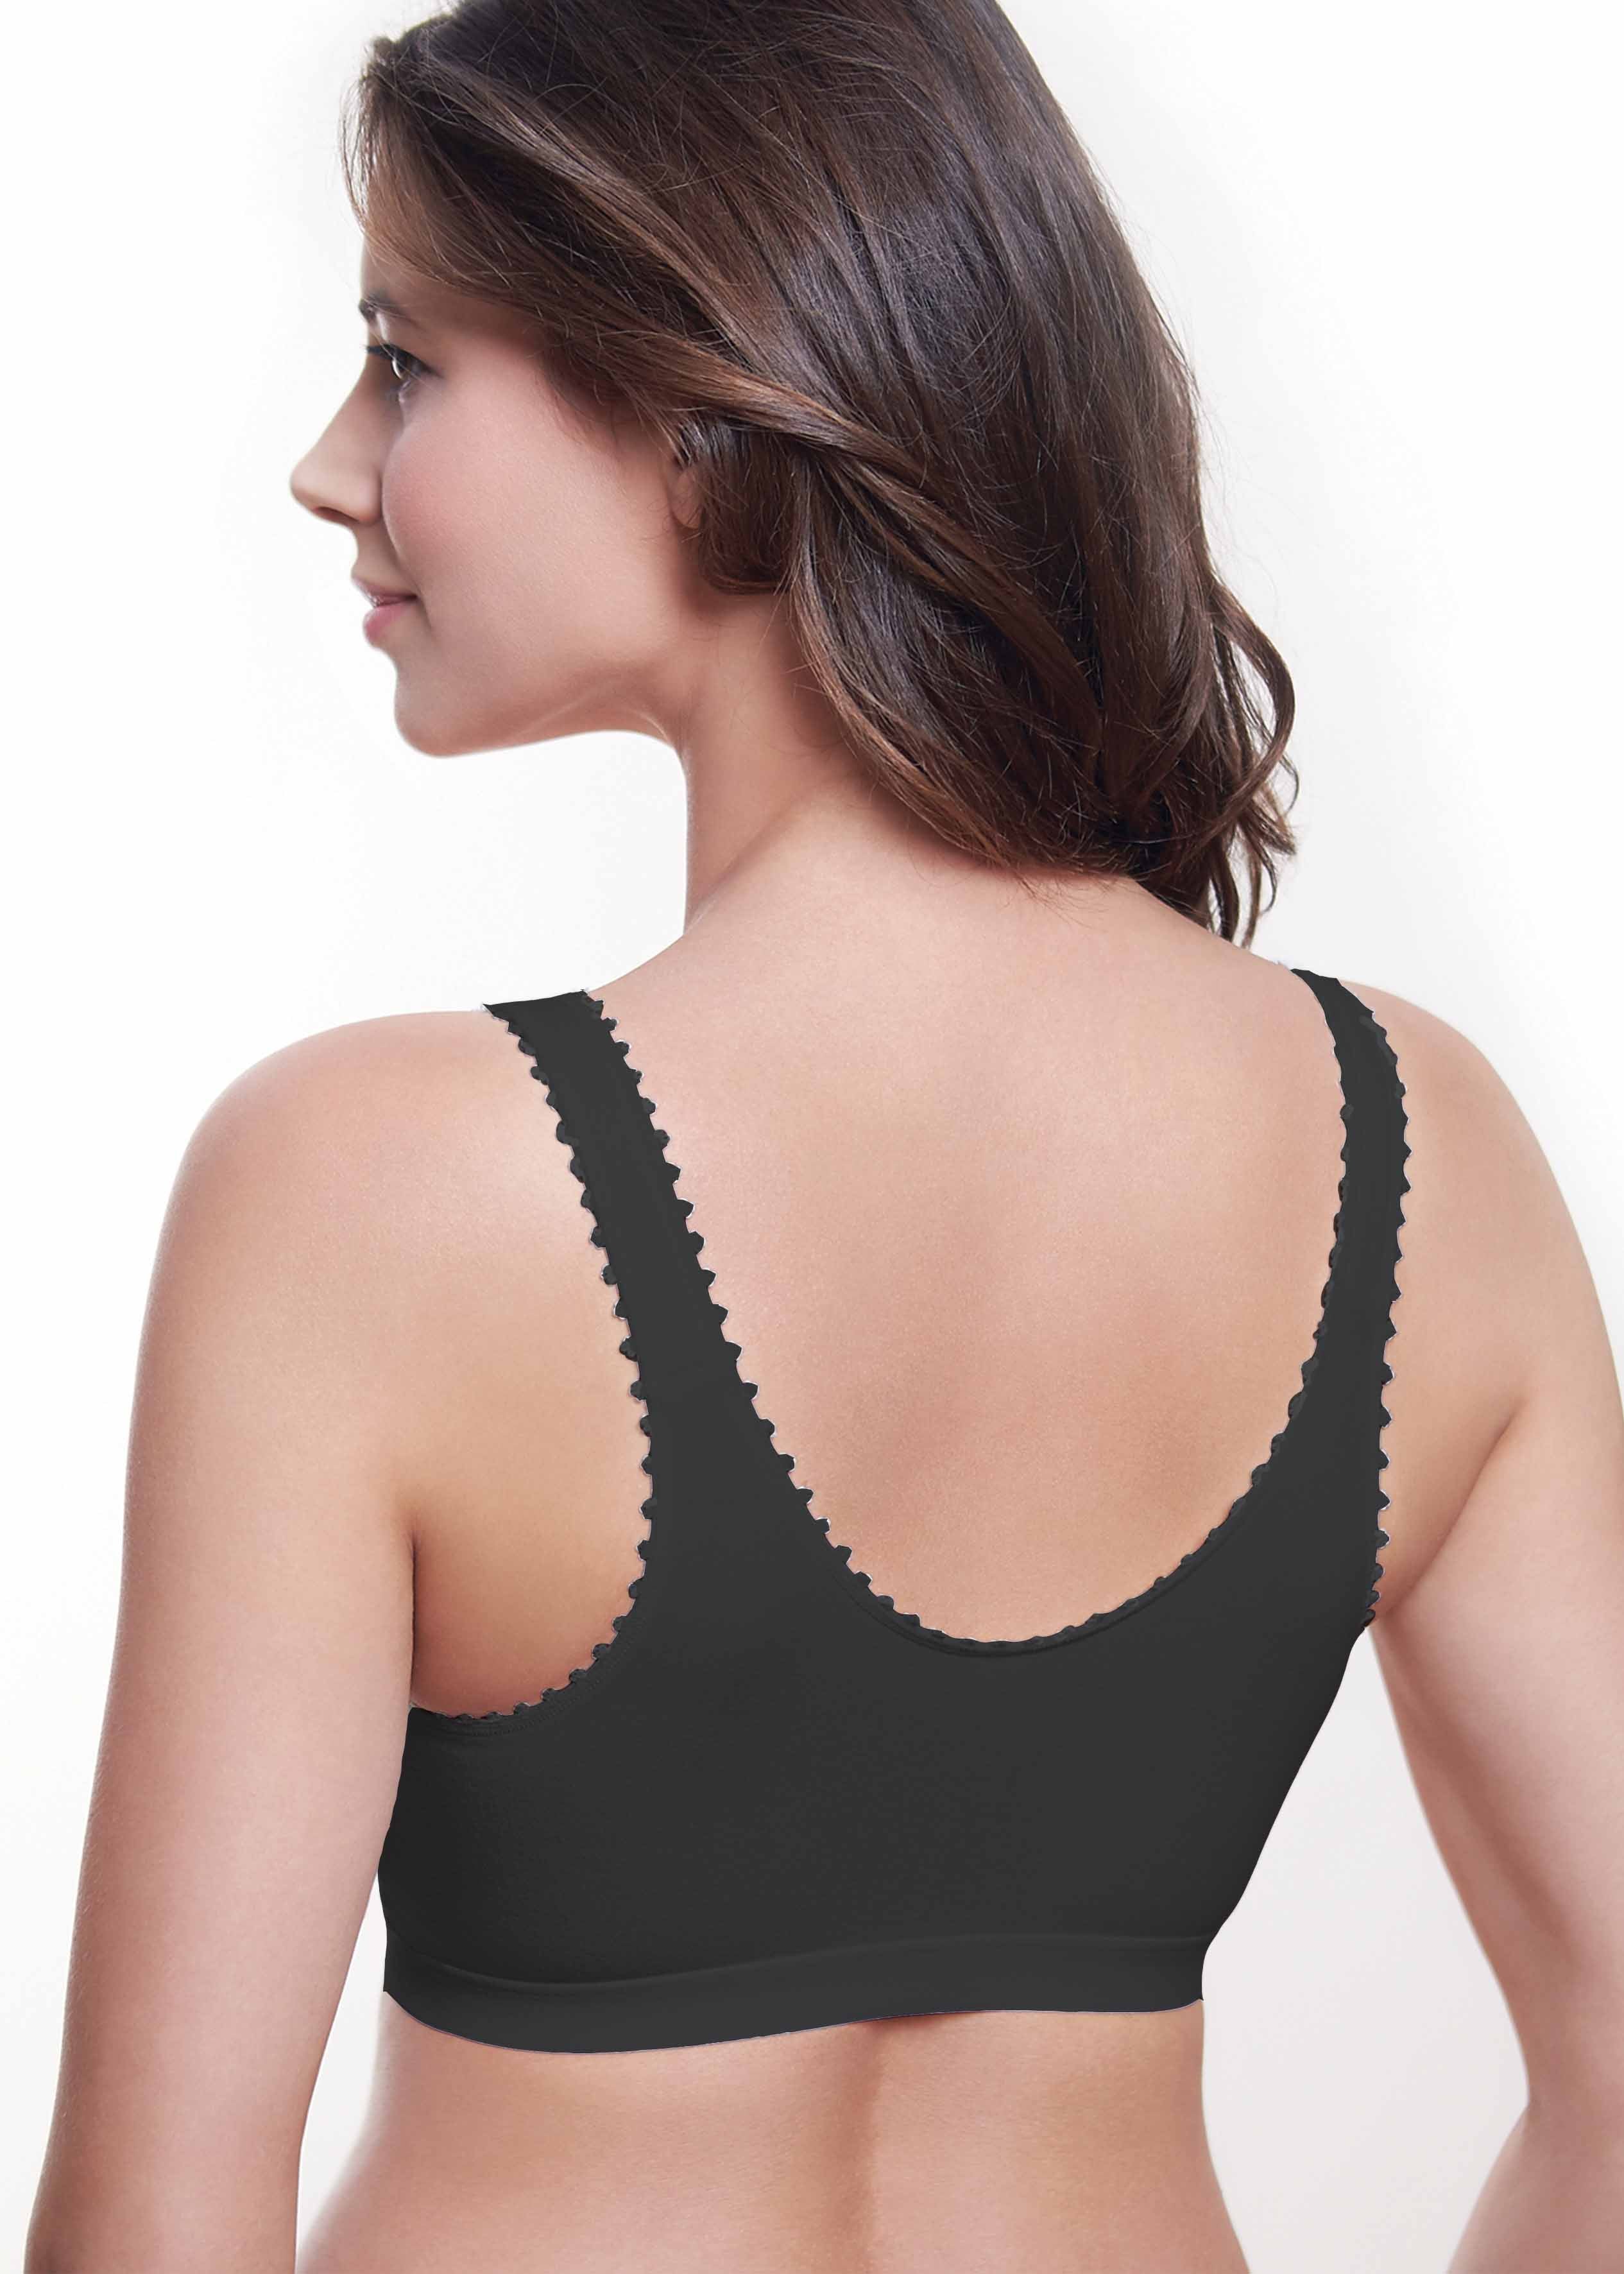 Doreen bra • Compare (62 products) find best prices »